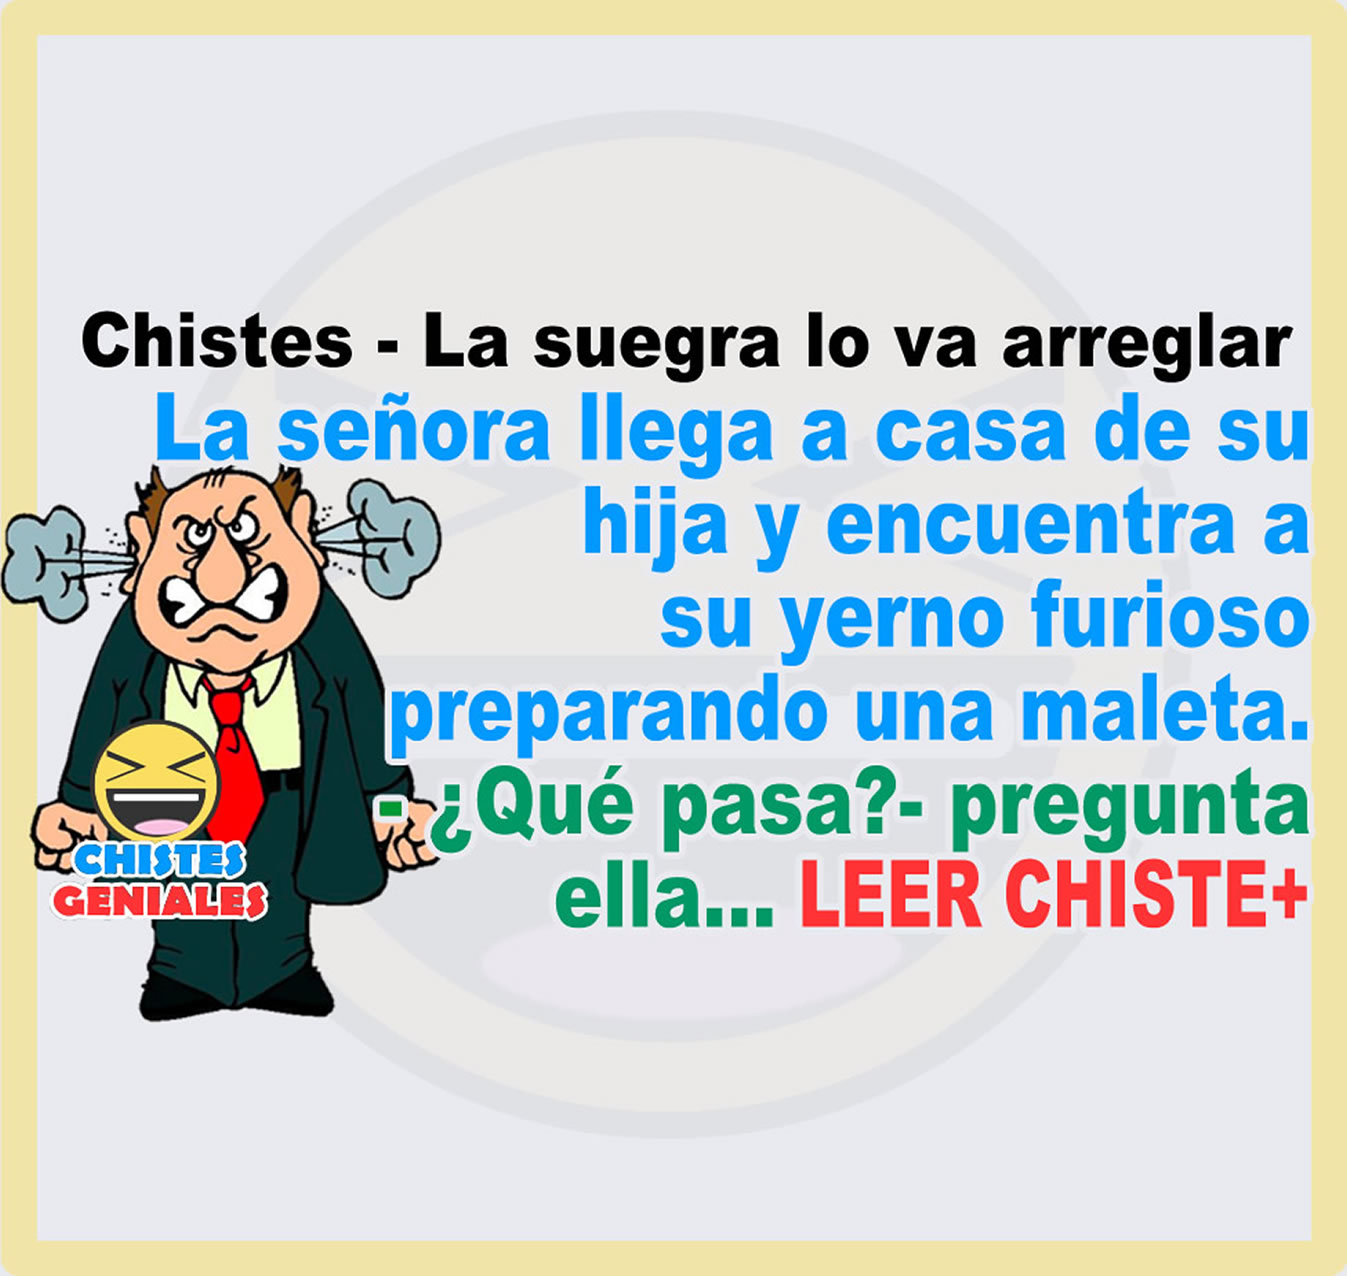 Chistes Geniales Chistes Geniales